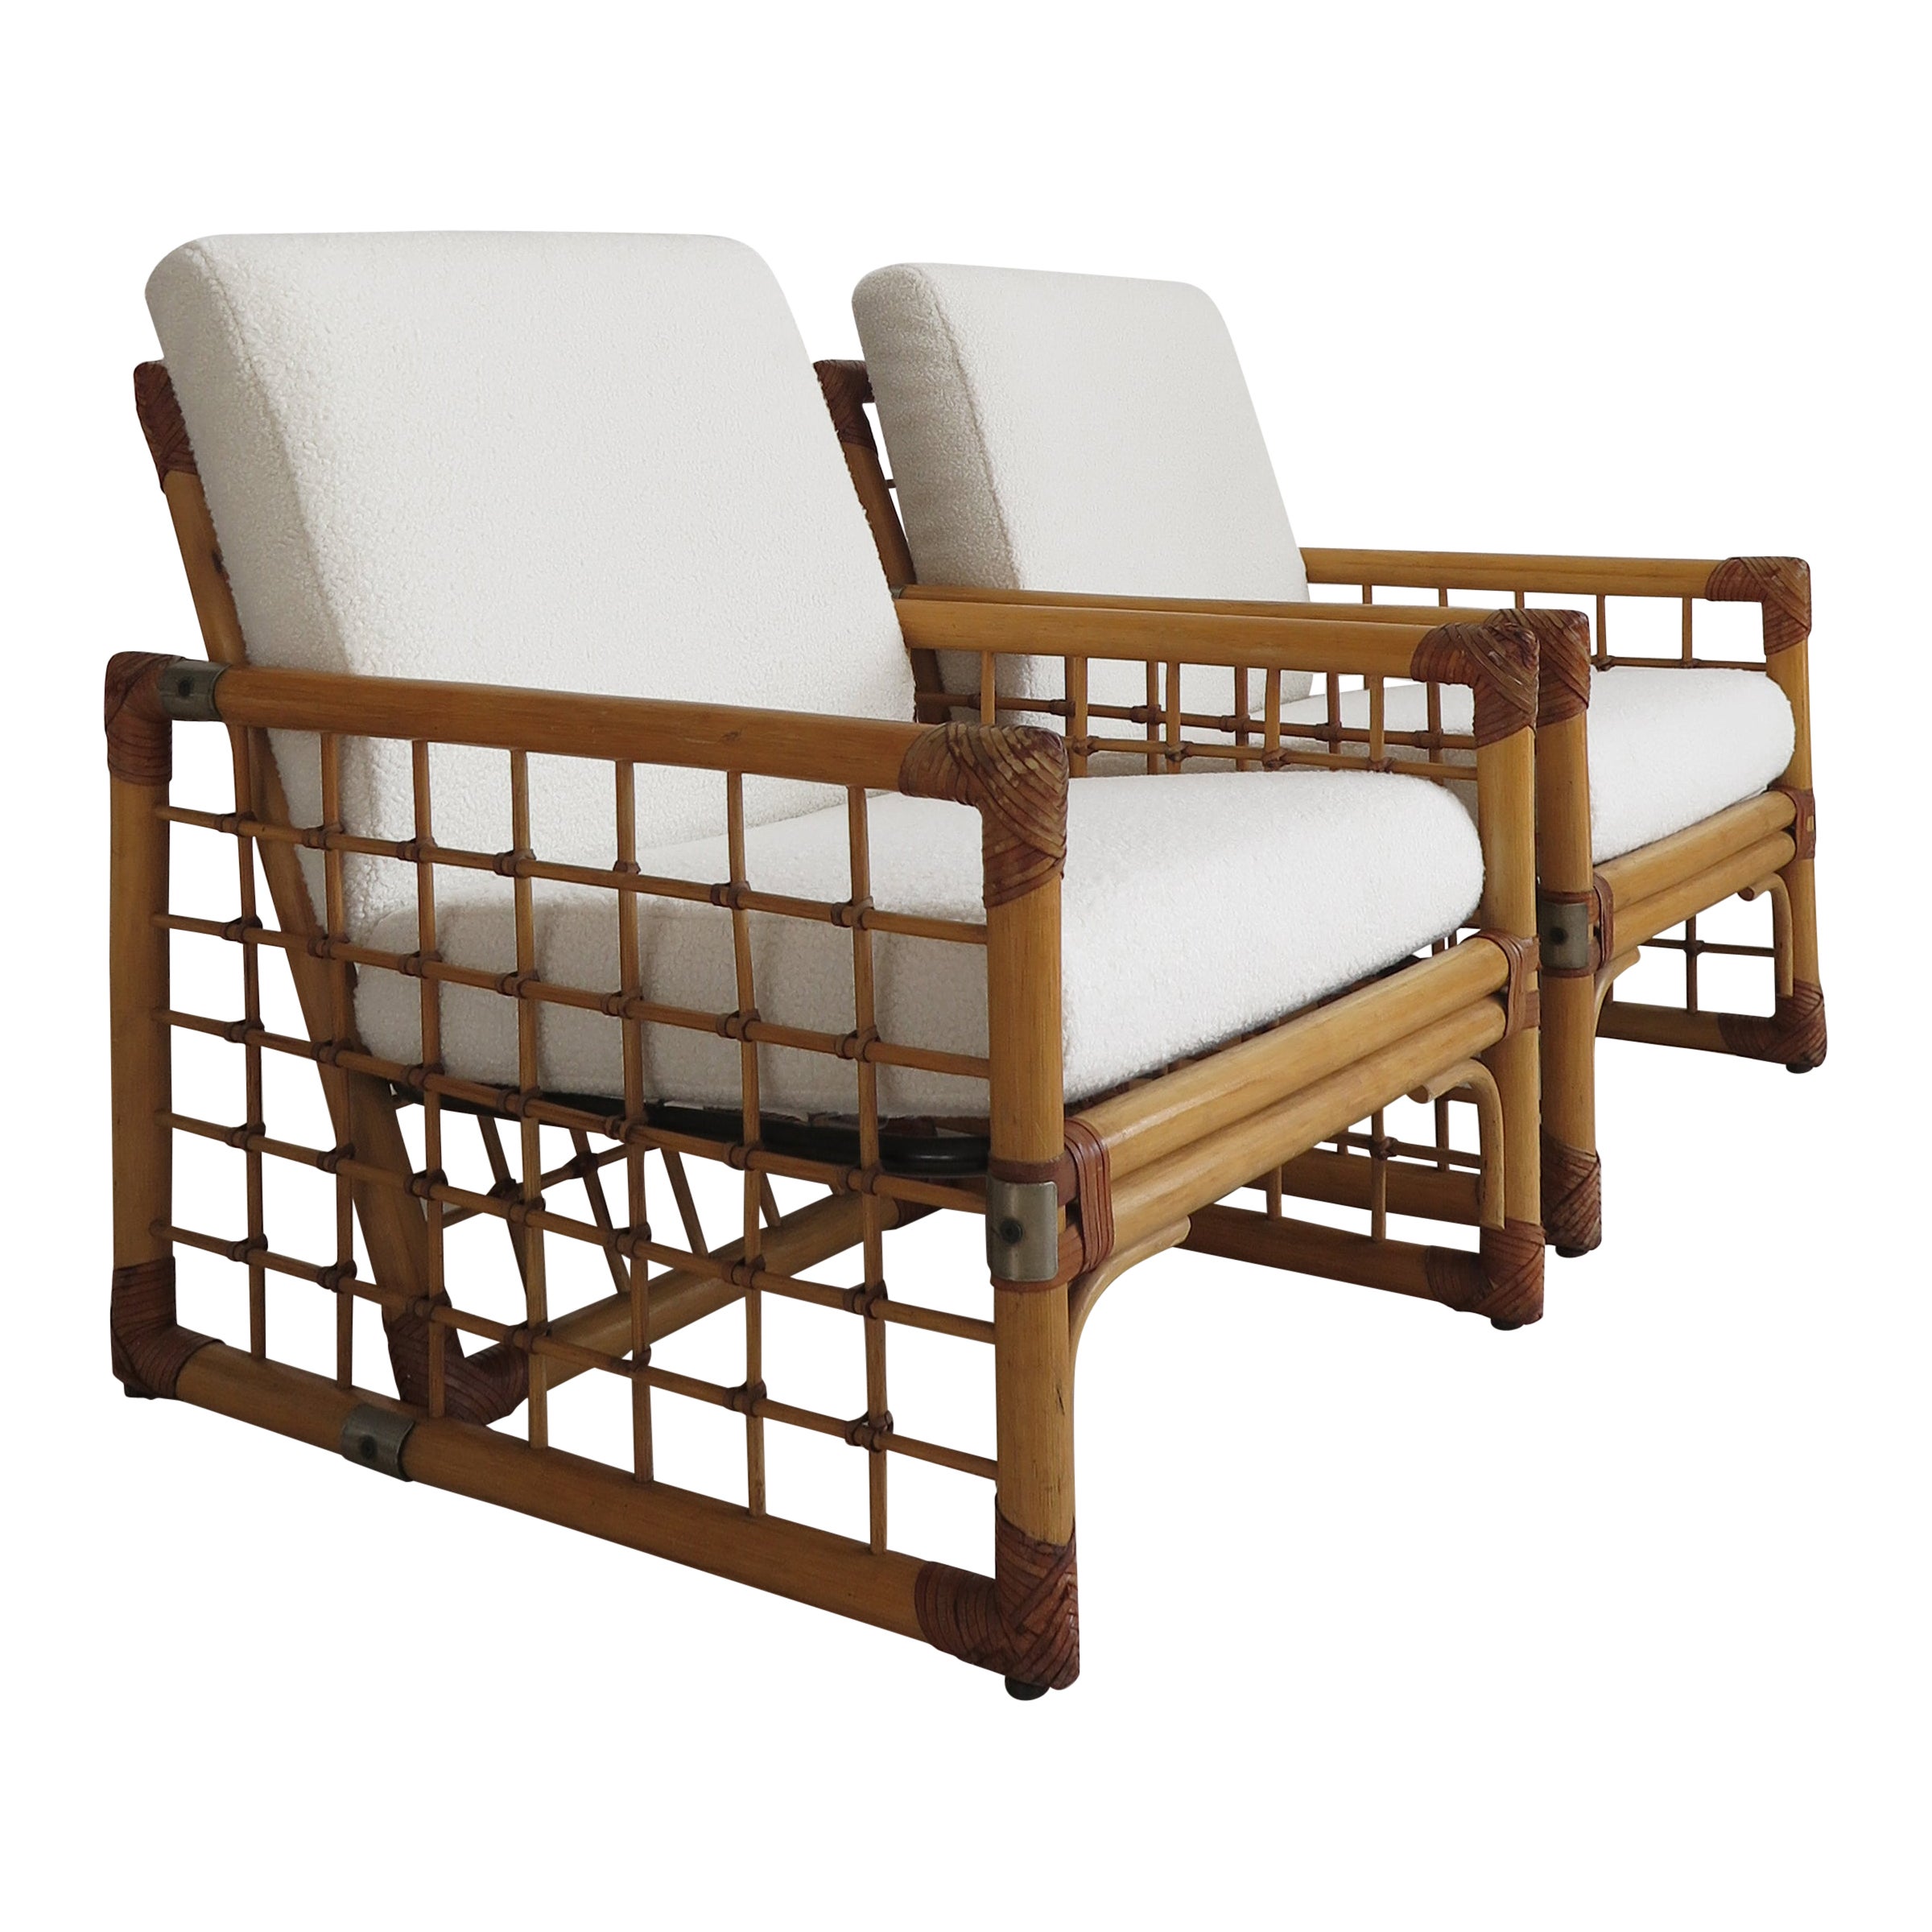 Bamboo, Indian Cane and Frabric Italian Armchairs, 1970s